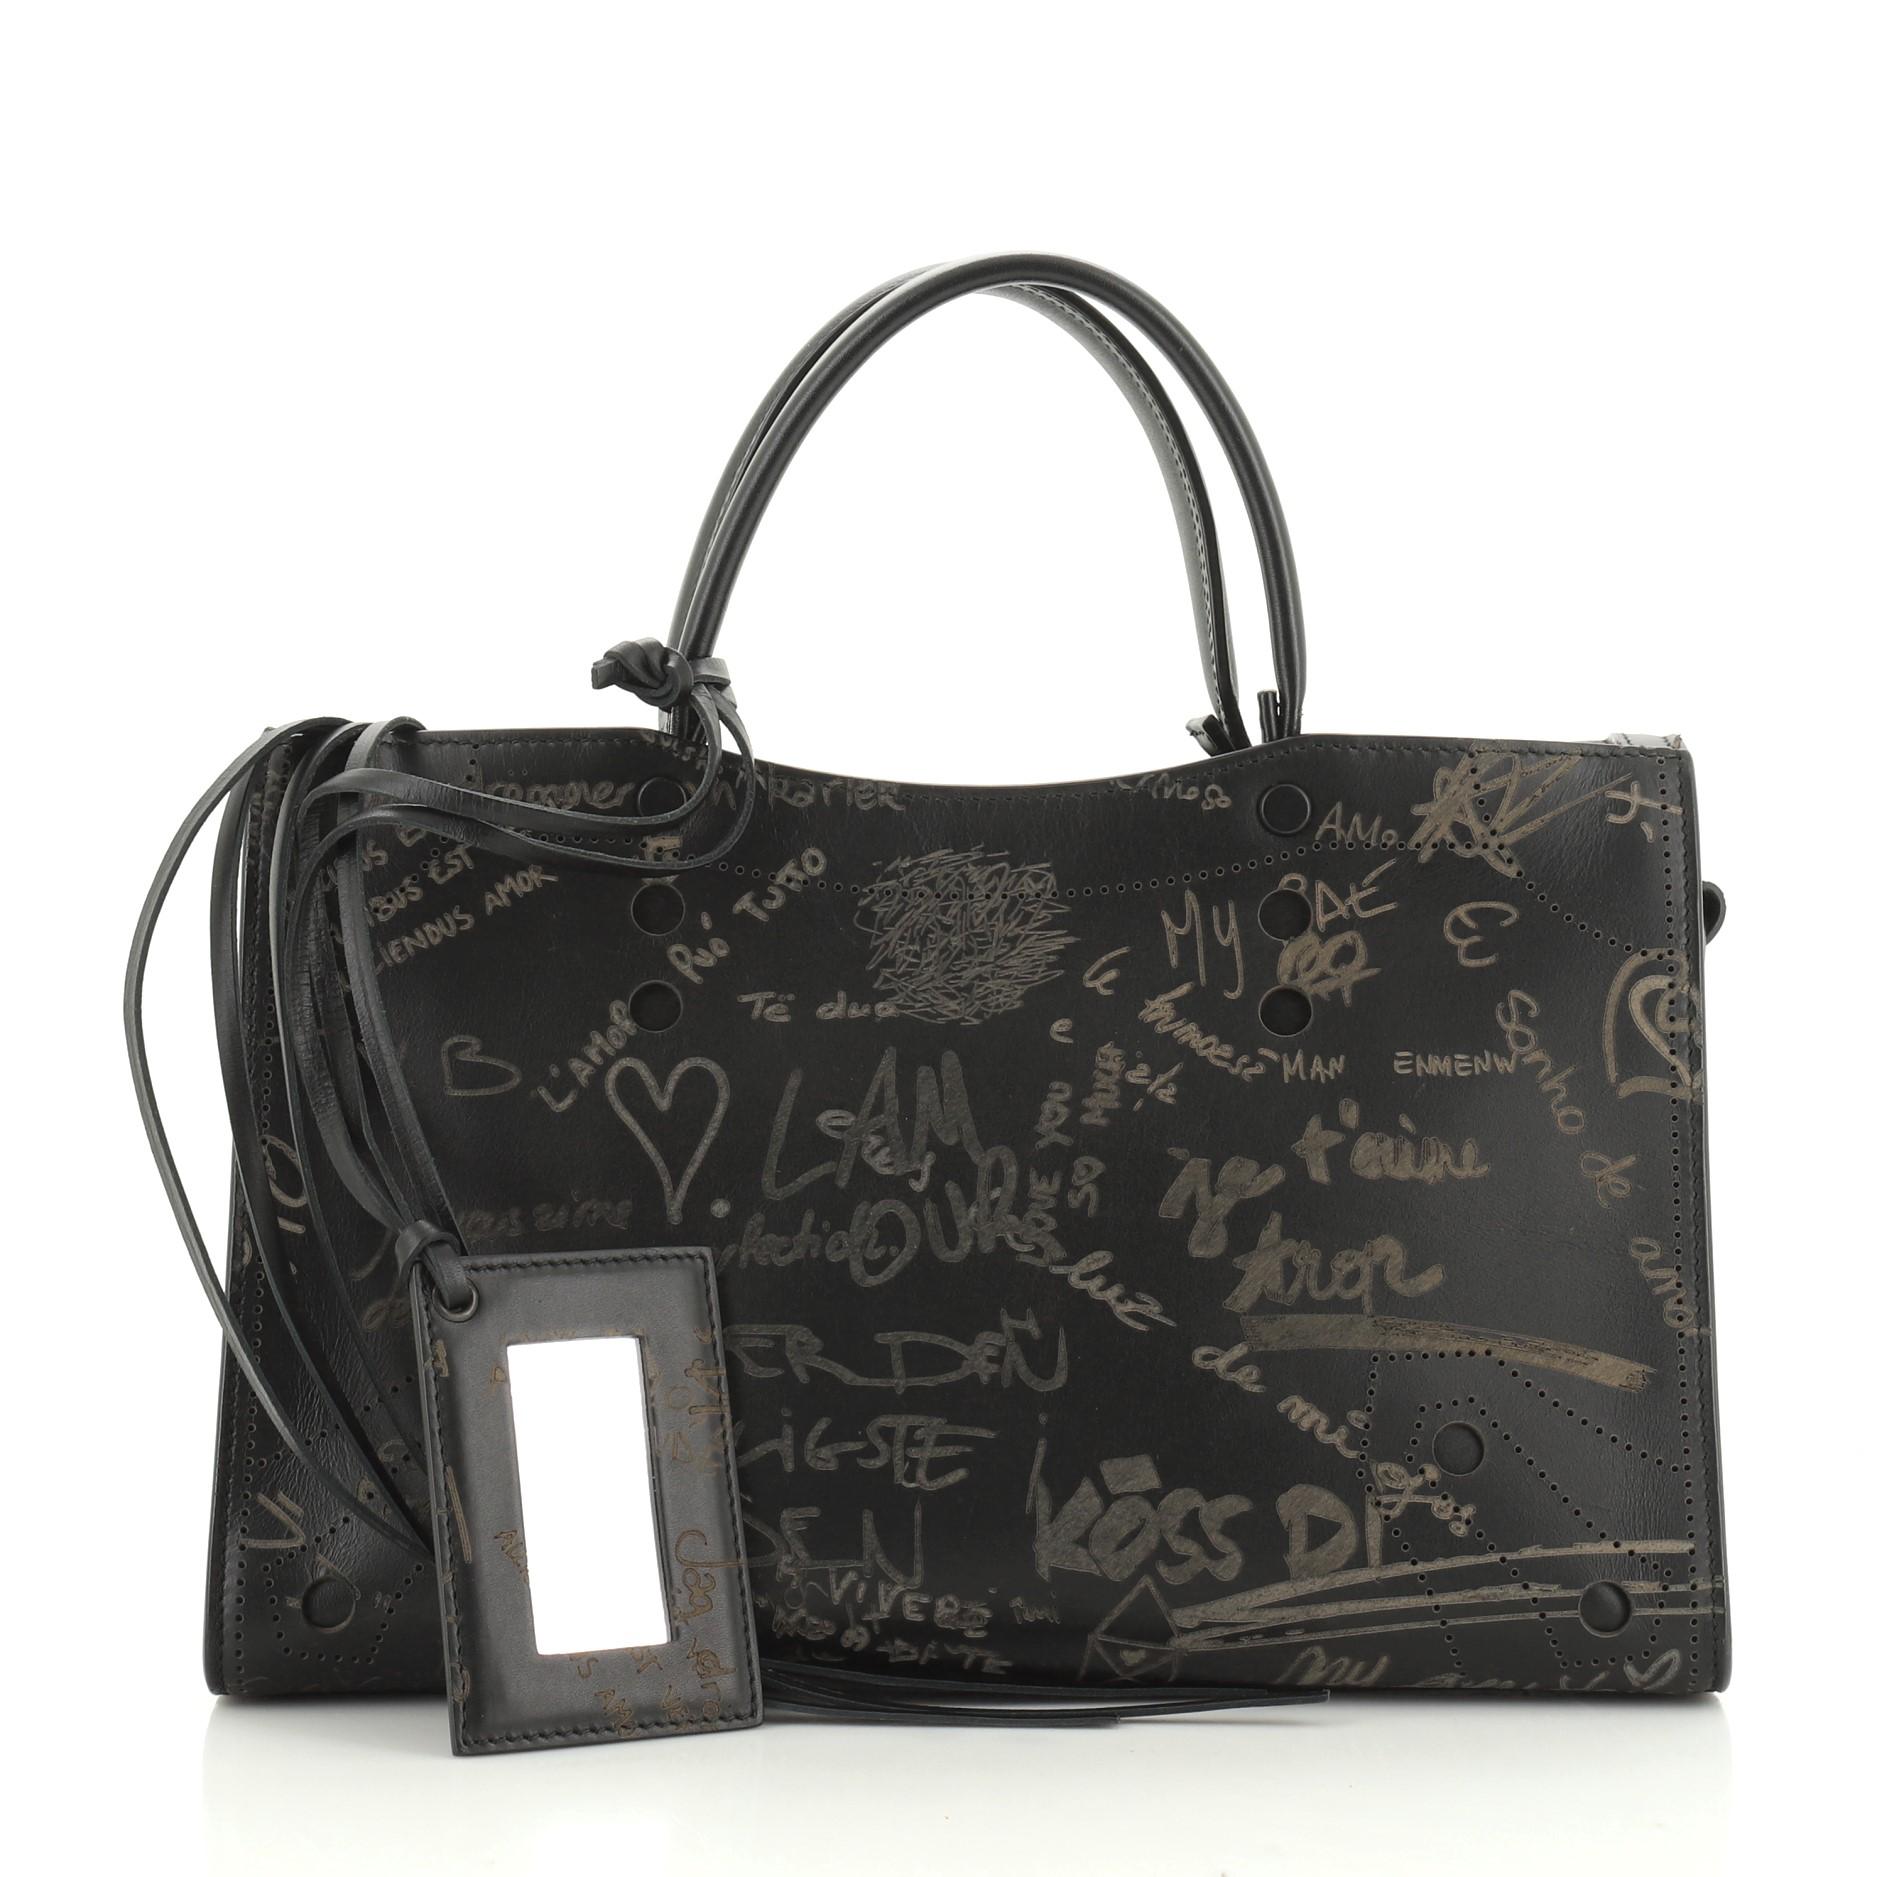 This Balenciaga Blackout City Bag Printed Leather Small, crafted in black printed leather, features dual leather handles and brass-tone hardware. Its zip closure opens to a black leather interior with zip and snap pockets. 

Estimated Retail Price: